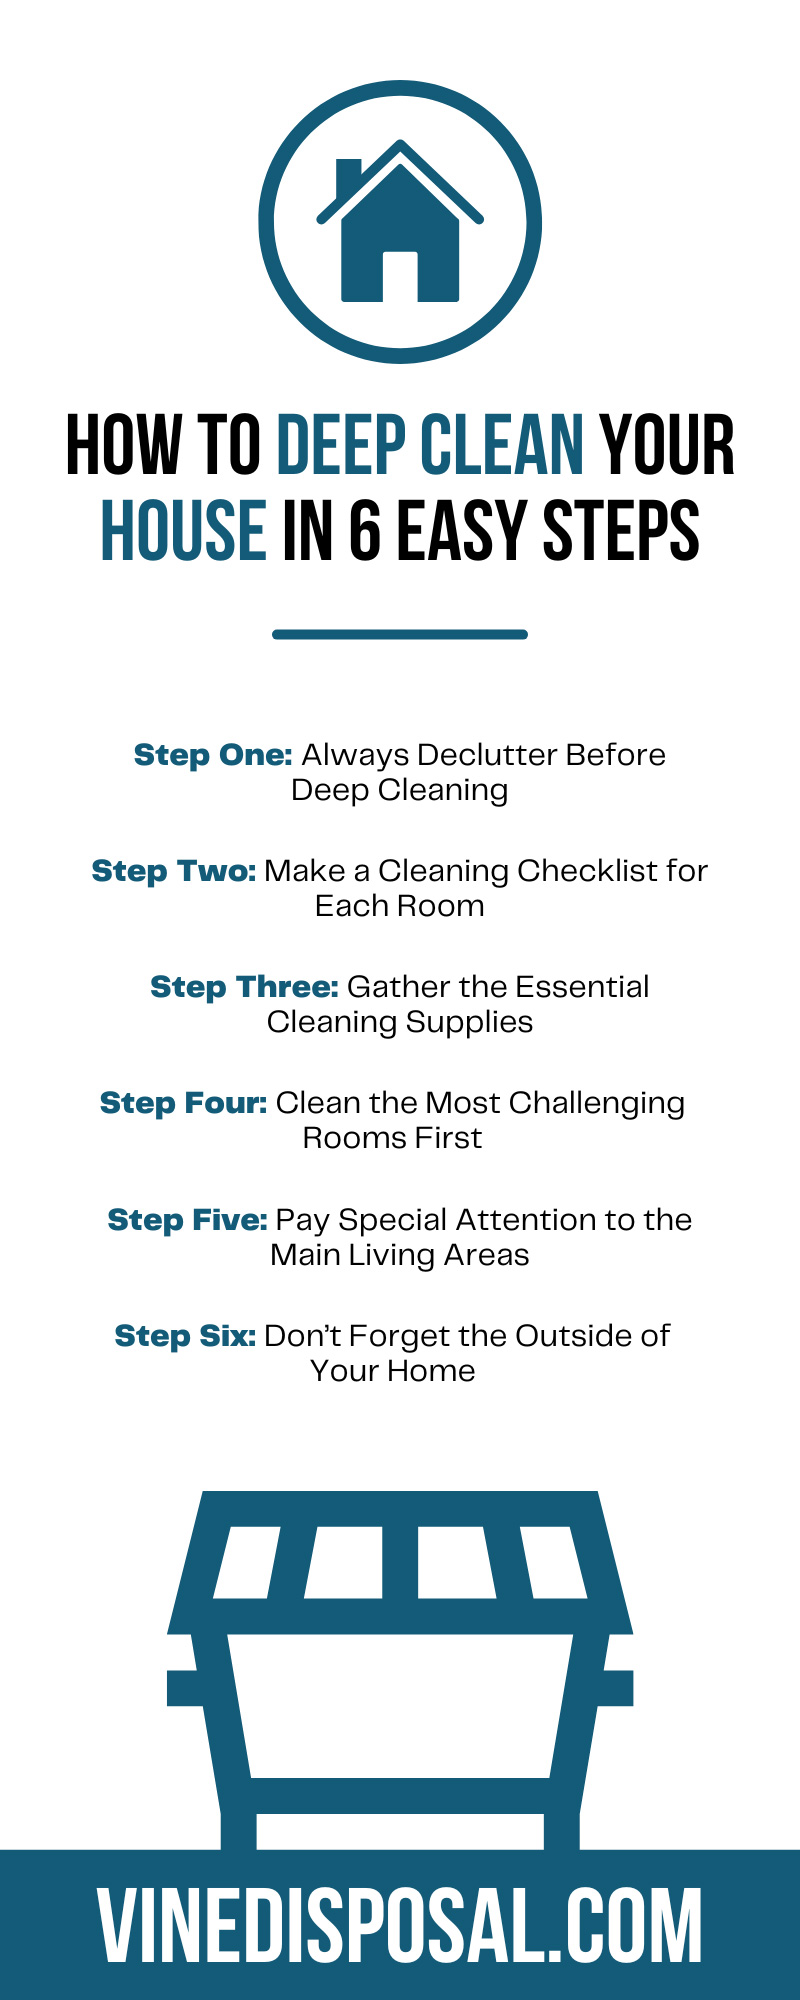 How To Deep Clean Your House in 6 Easy Steps